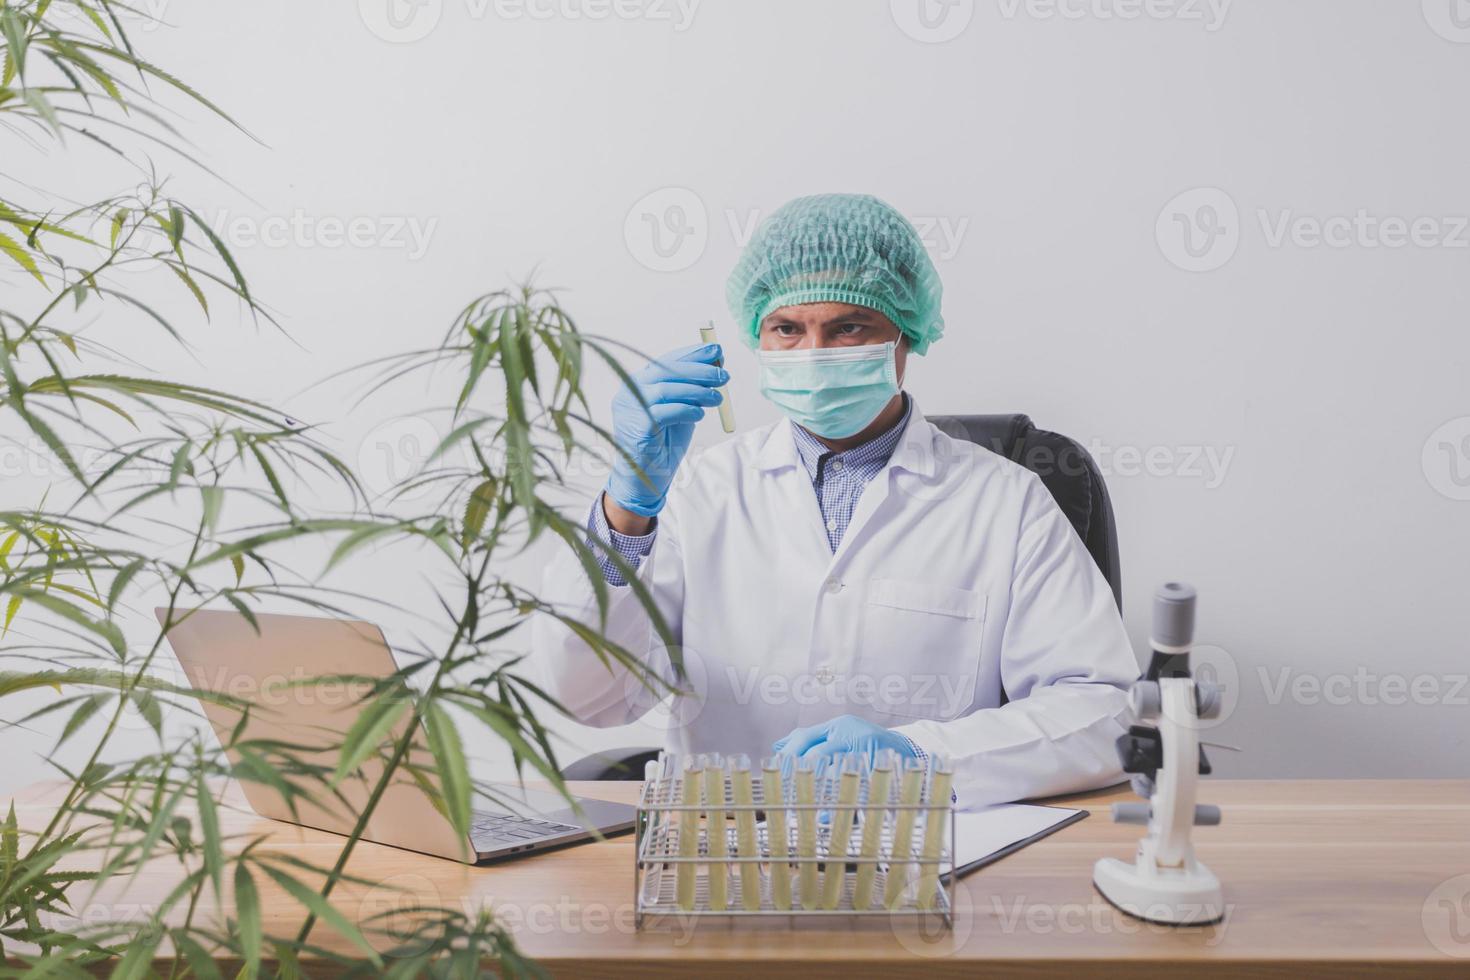 Cannabis researchers are doing scientific experiments. photo